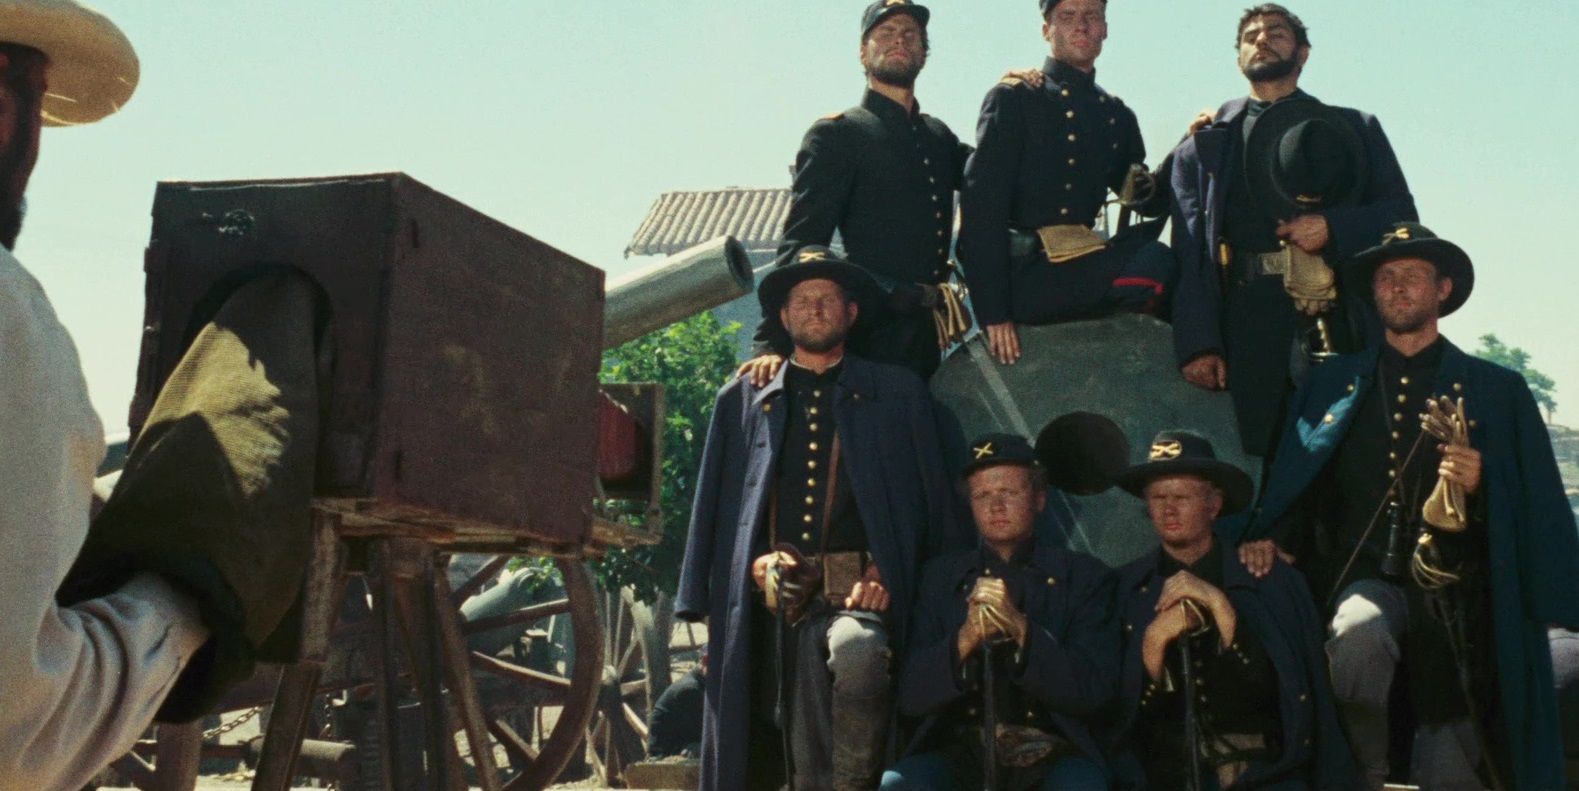 Civil War soldiers pose for a photo in The Good, the Bad and the Ugly.